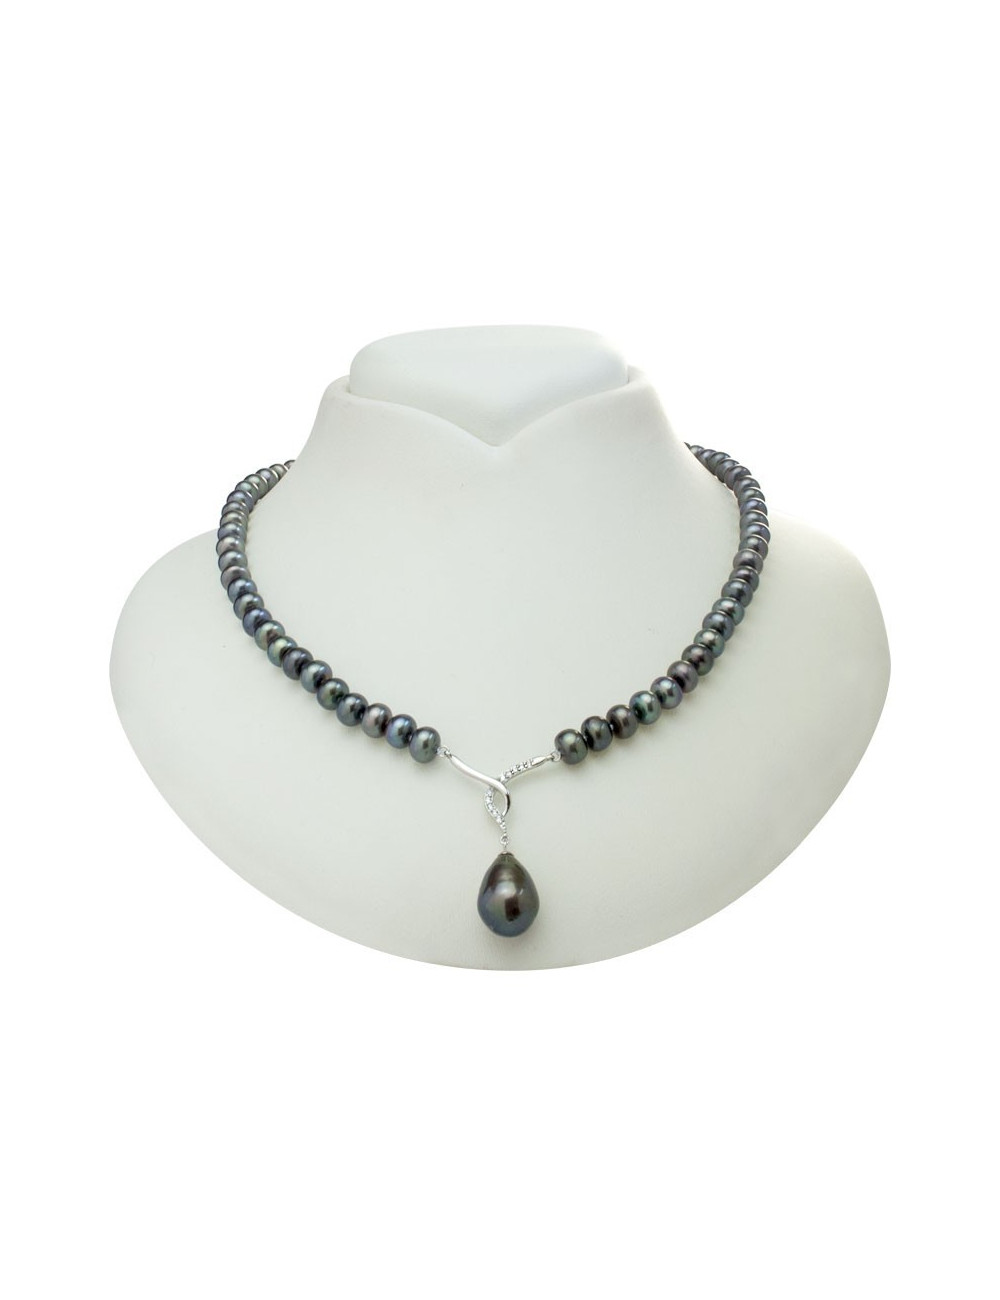 Silver necklace with freshwater pearls YA6070S